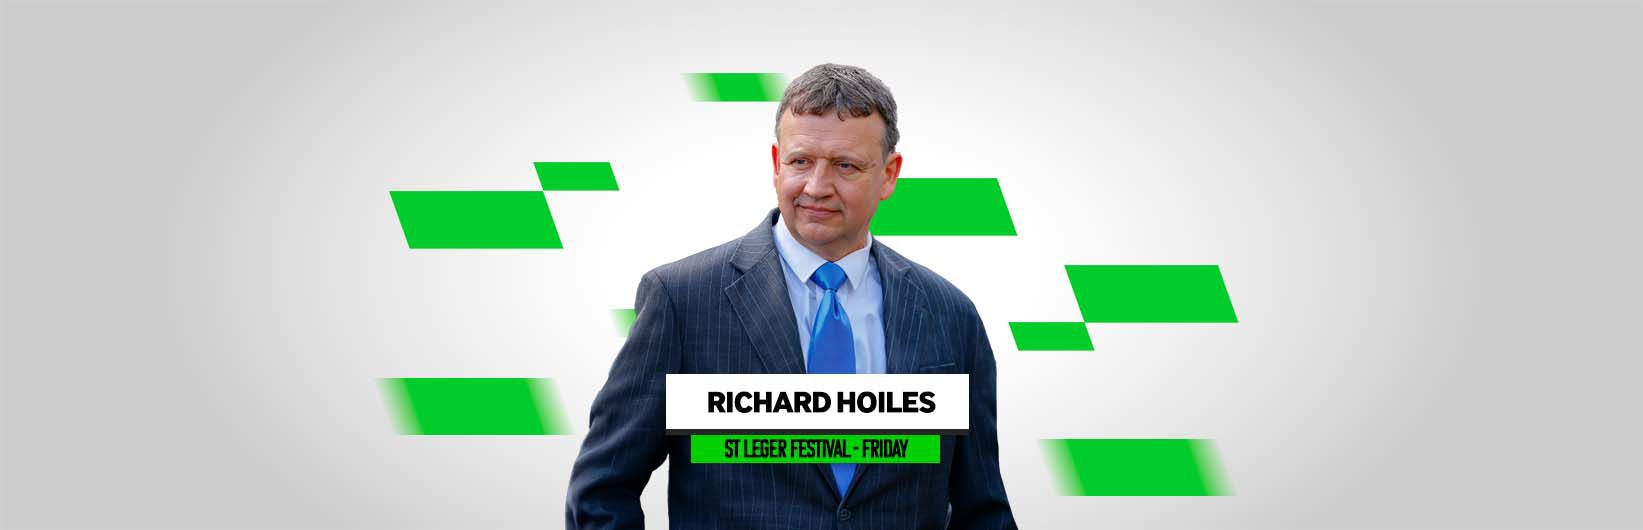 Richard Hoiles: 4 Friday fancies for Doncaster and elsewhere